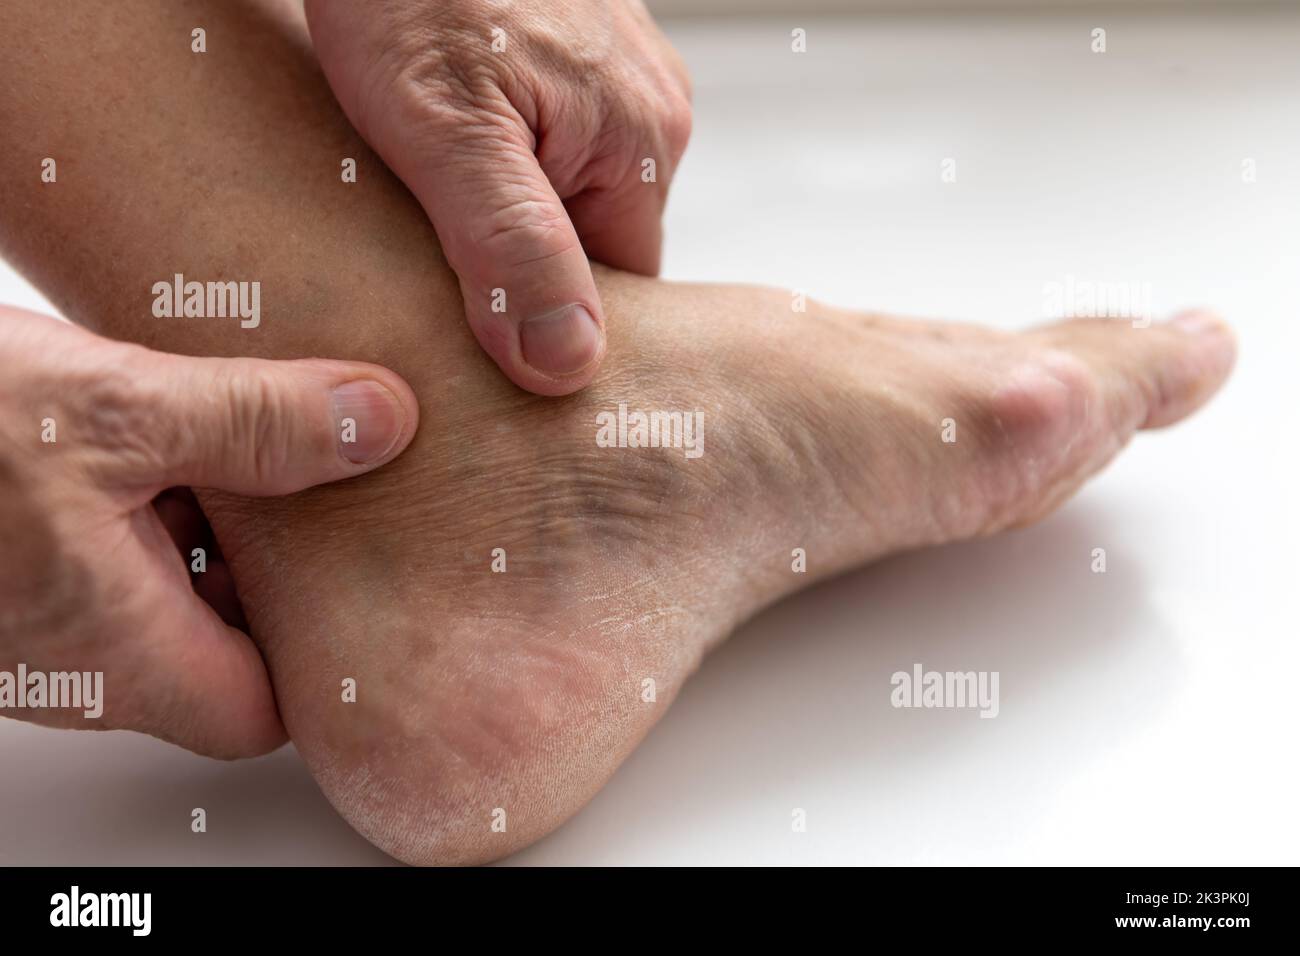 A person massaging foot ankle joint suffering from arthritis. Stock Photo